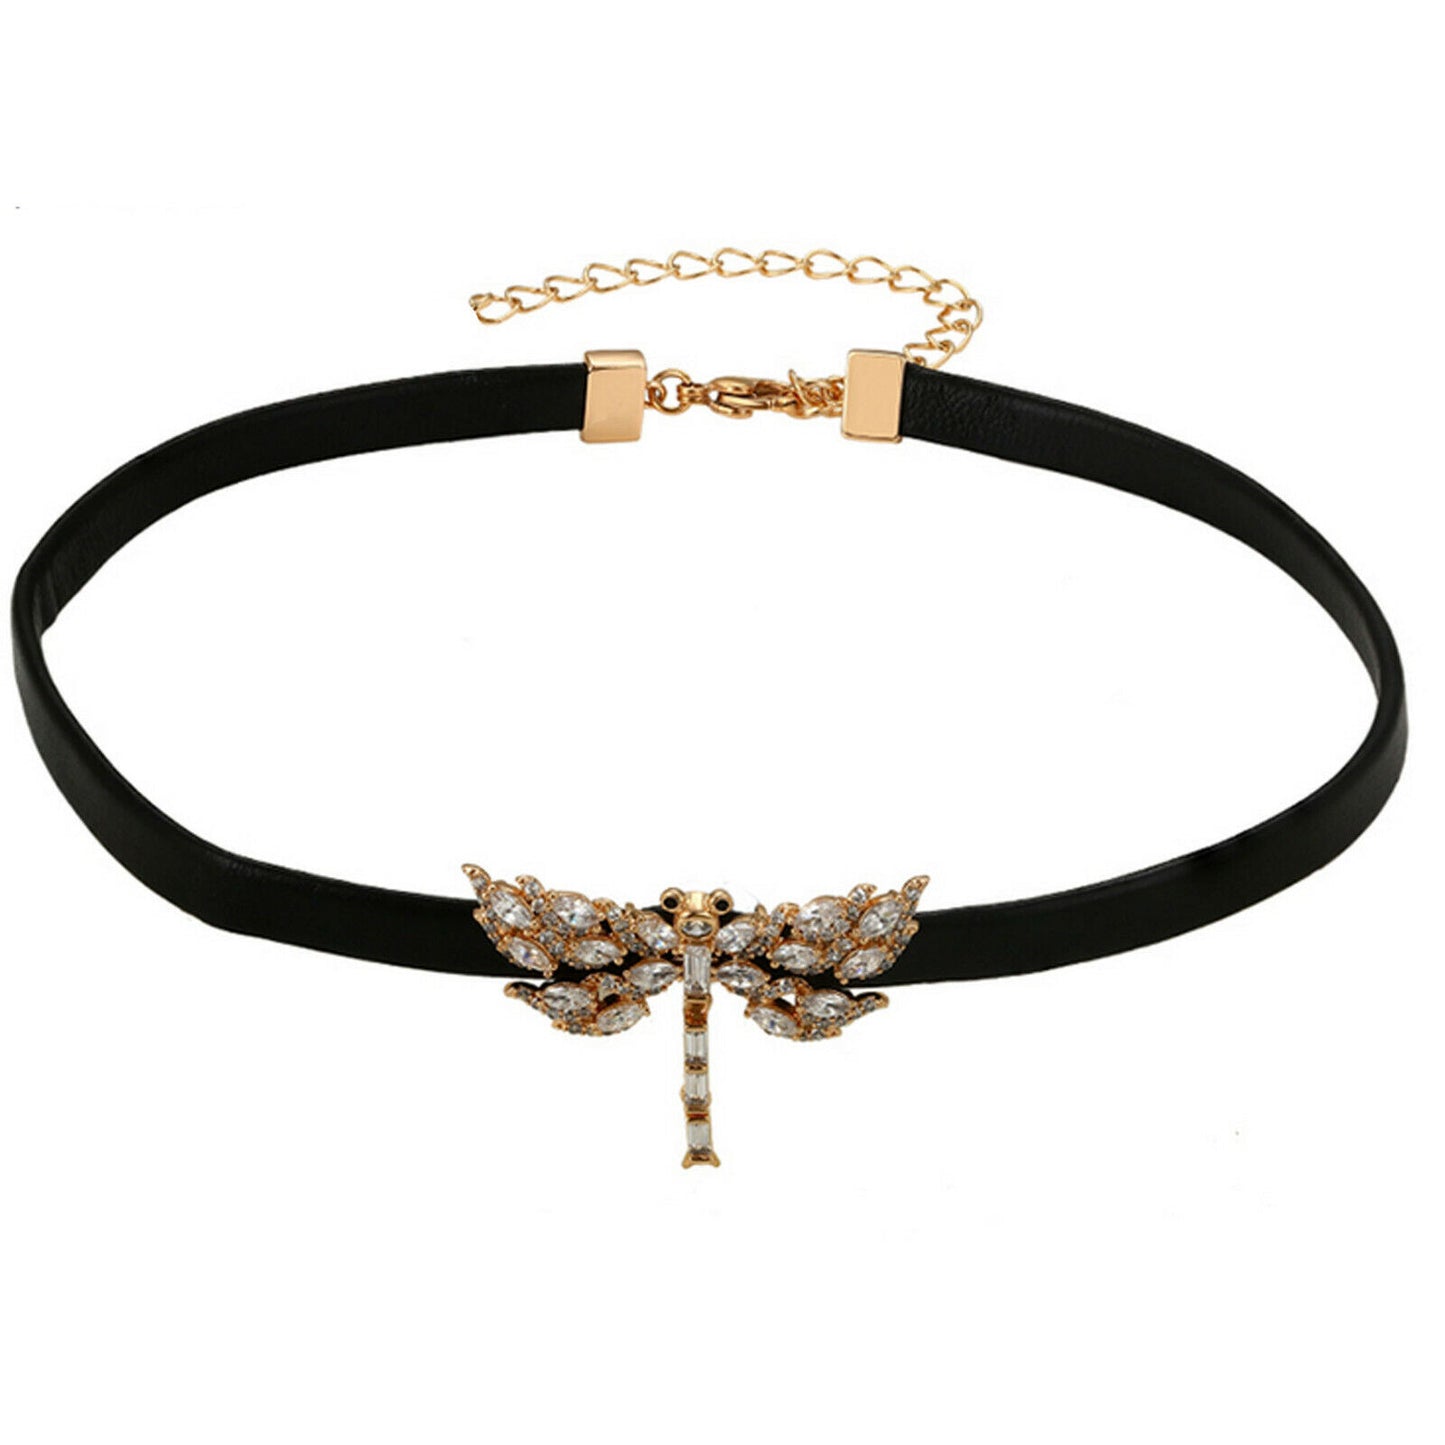 Necklaces - 18K Gold Plated. Dragonfly Choker Collar Necklace. Black cord with Lobster Clasp